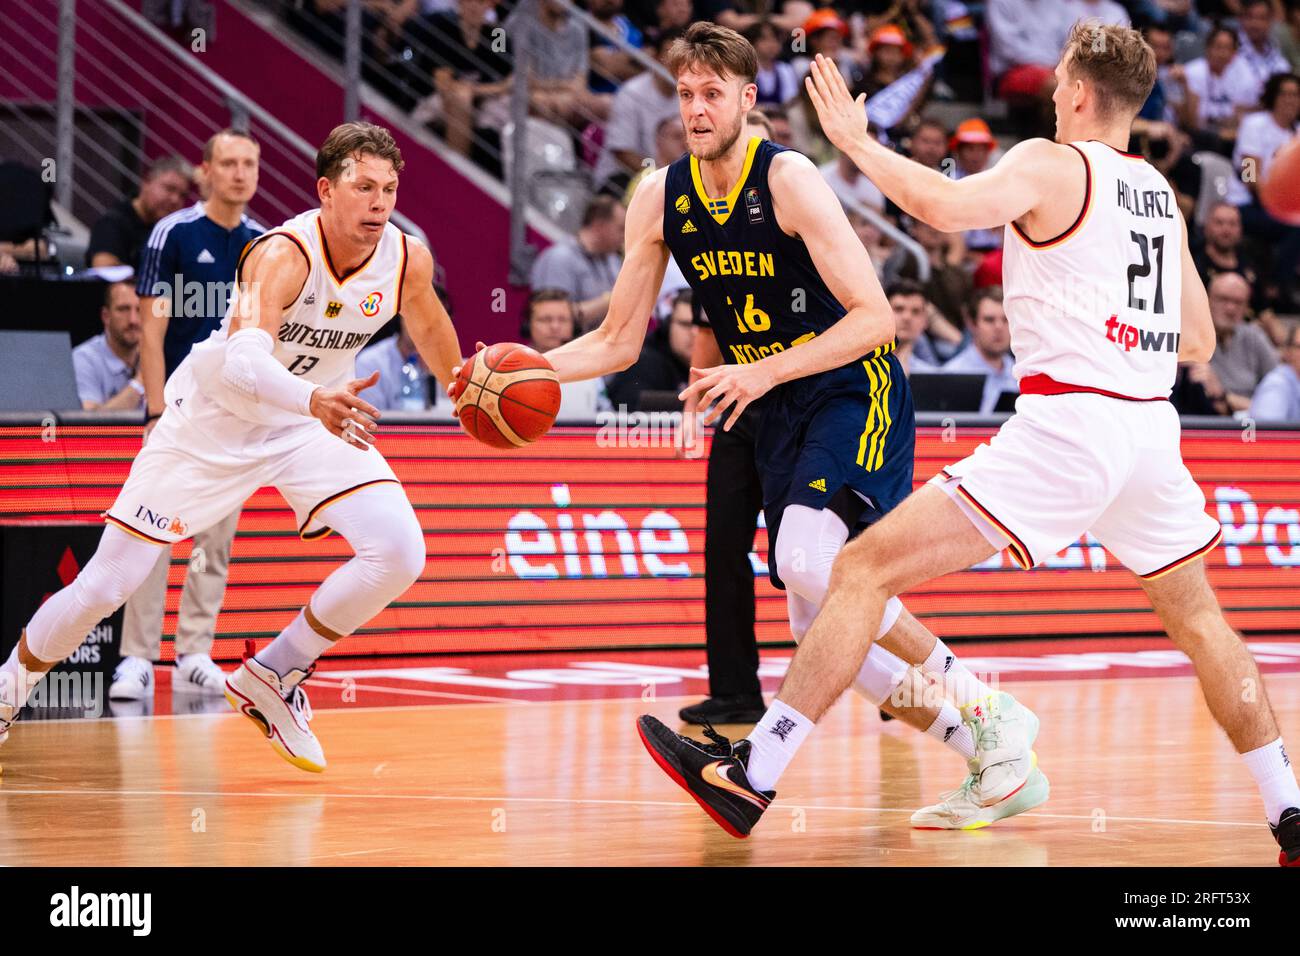 Bonn, Germany. 05th Aug, 2023. Basketball: International match, Germany - Sweden, Telekom Dome. Germany's Moritz Wagner (l) and Sweden's Nick Spires (m) fight for the ball. On the right, Germany's Justus Hollatz. Credit: Marius Becker/dpa/Alamy Live News Stock Photo